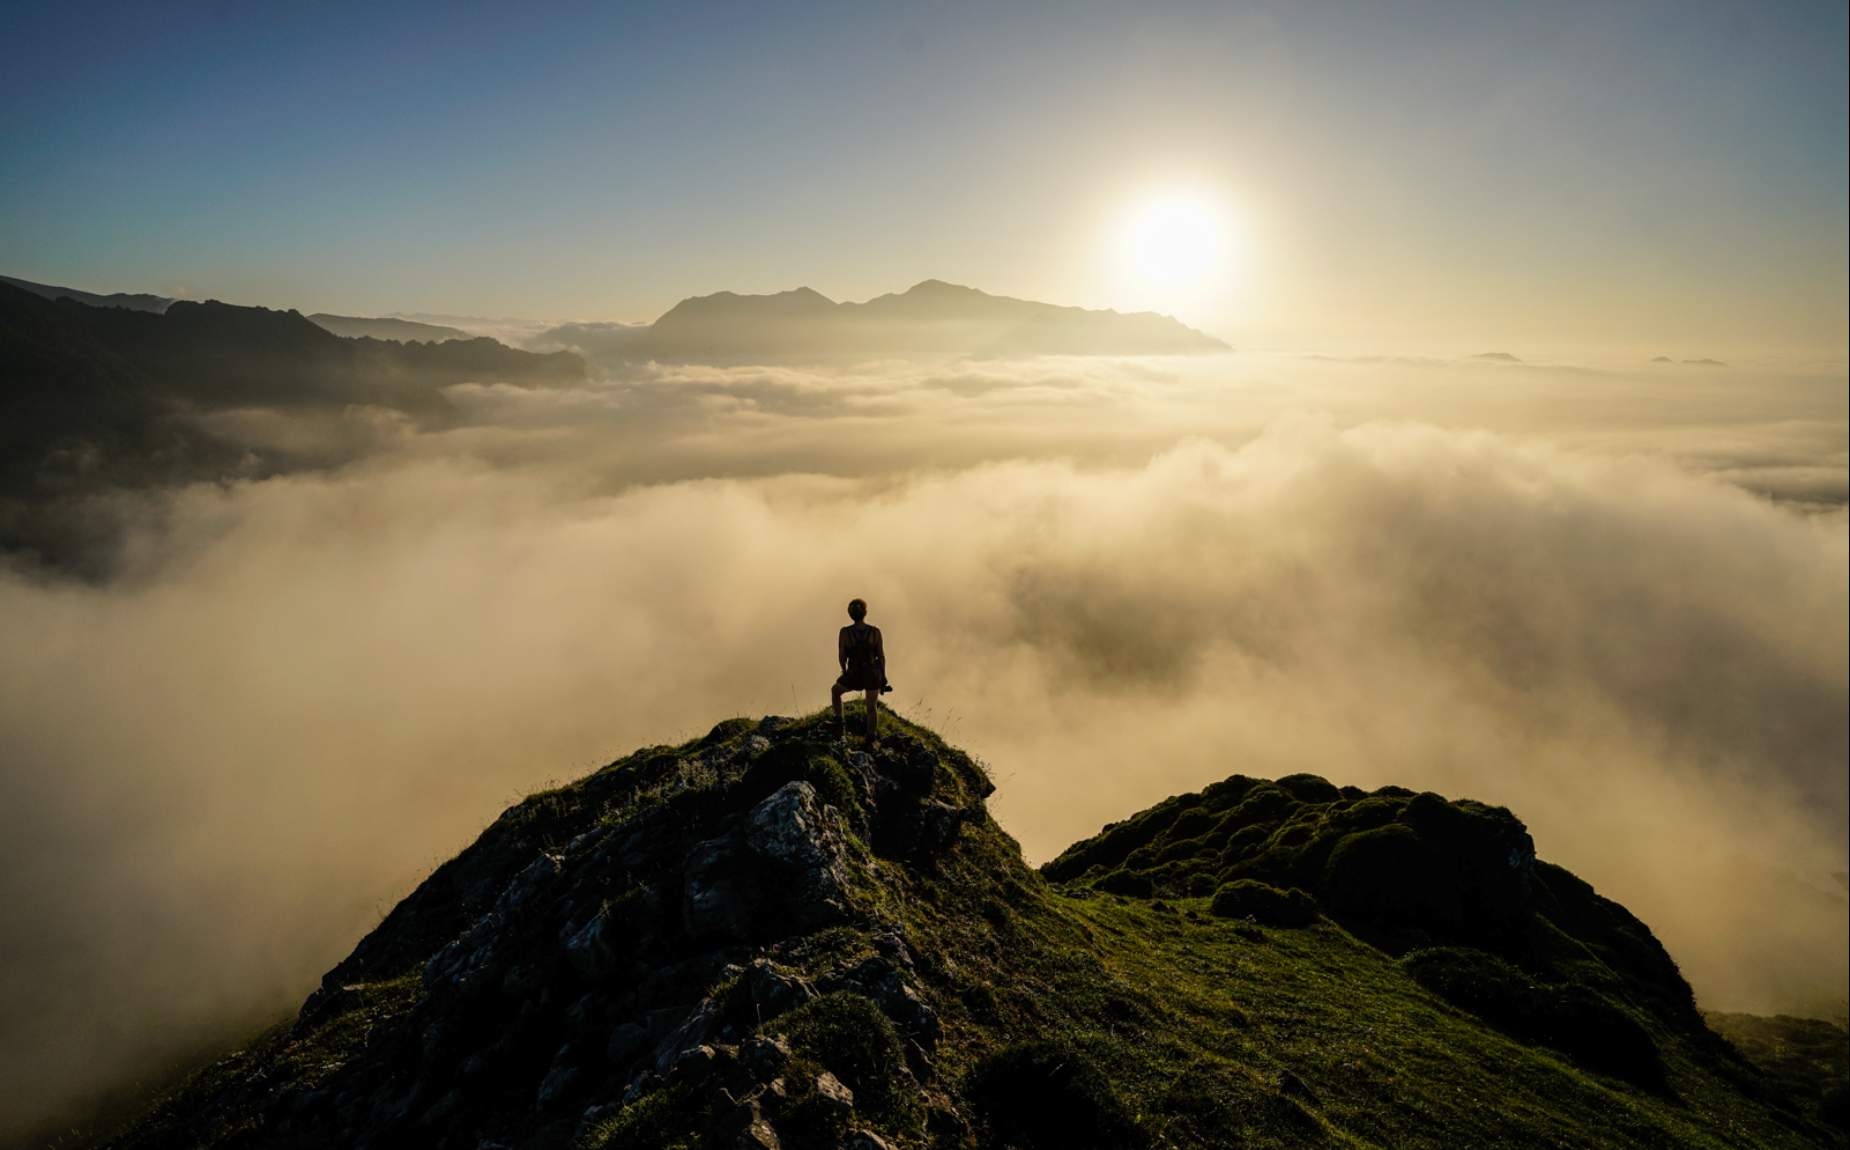 A girl on the top of a mountain looking at the landscape with low clouds.